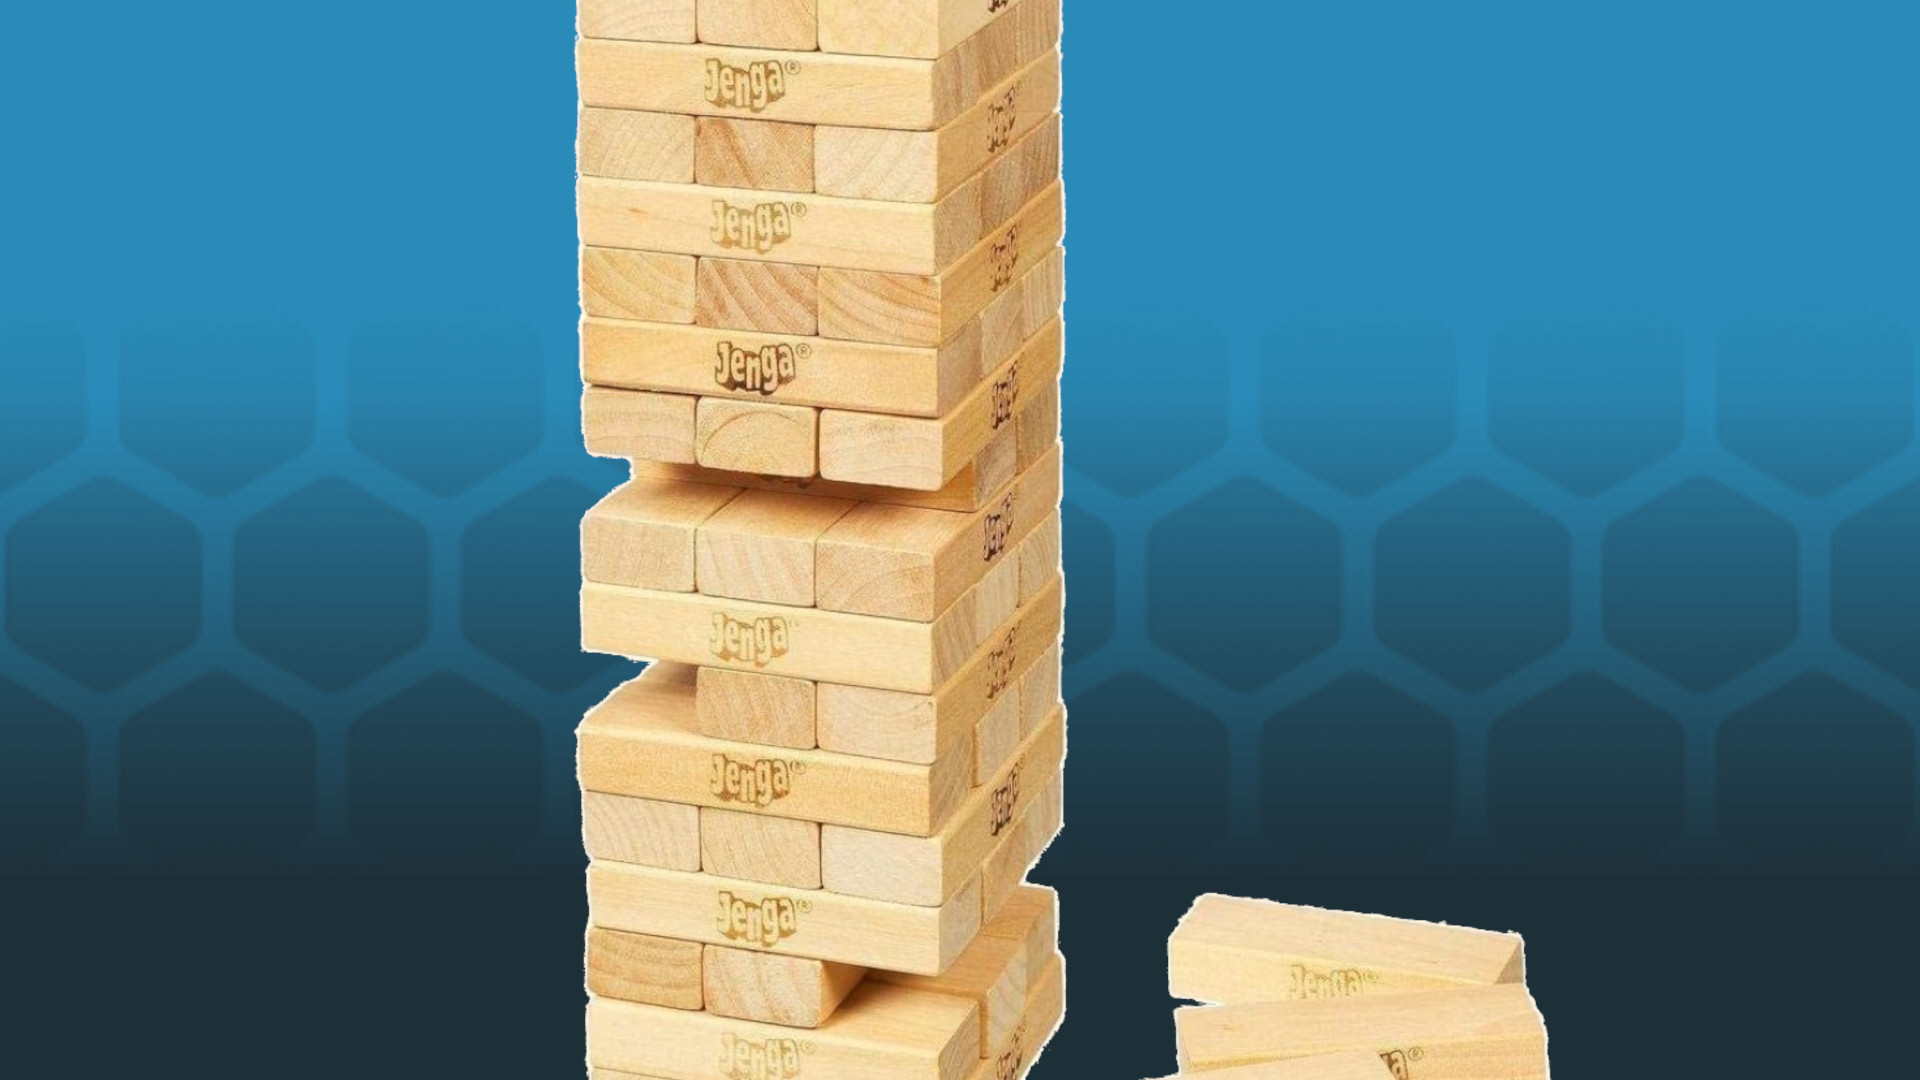 Board game types - Jenga tower on blue background